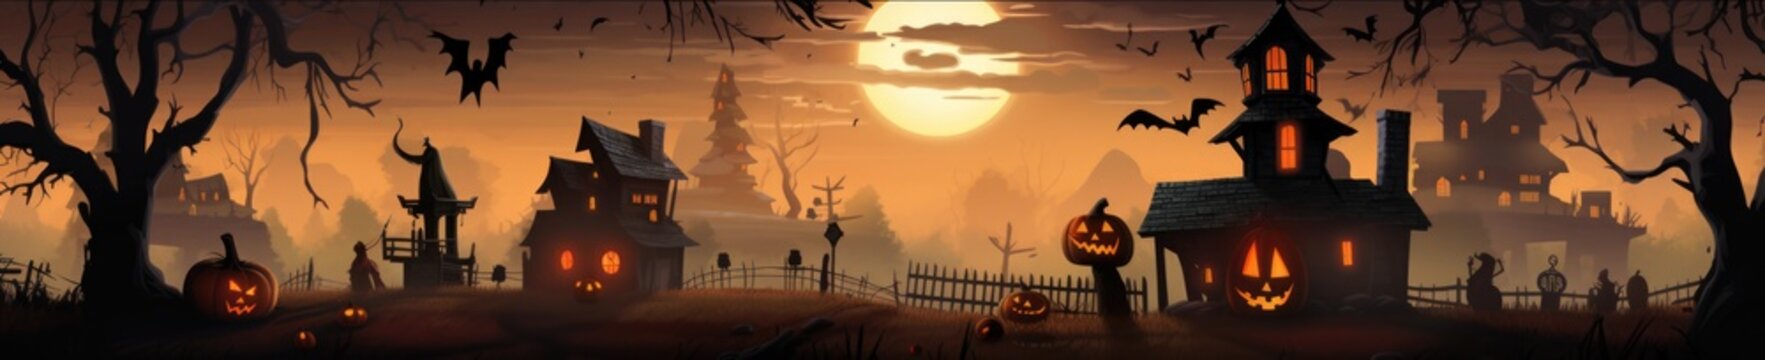 A painting of a halloween scene with pumpkins